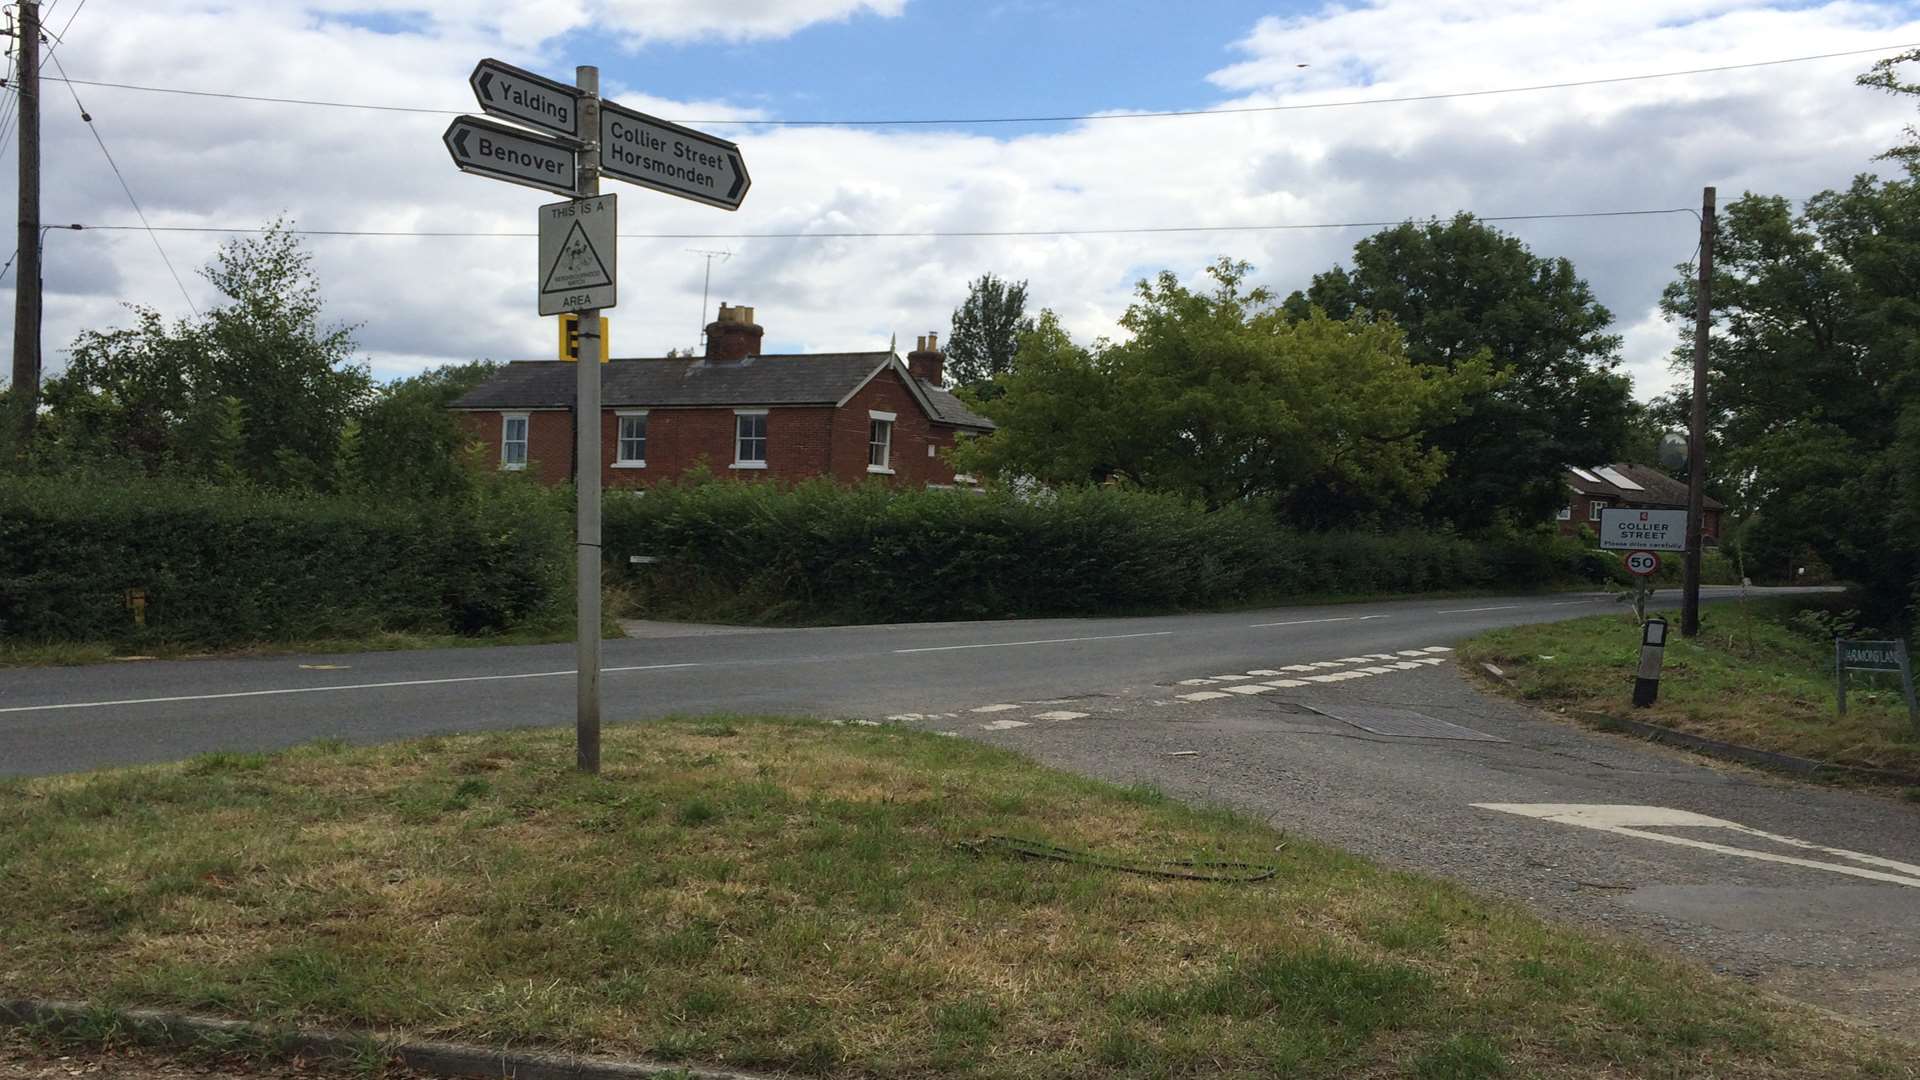 The body of Matthew Eyre was found on a traffic island